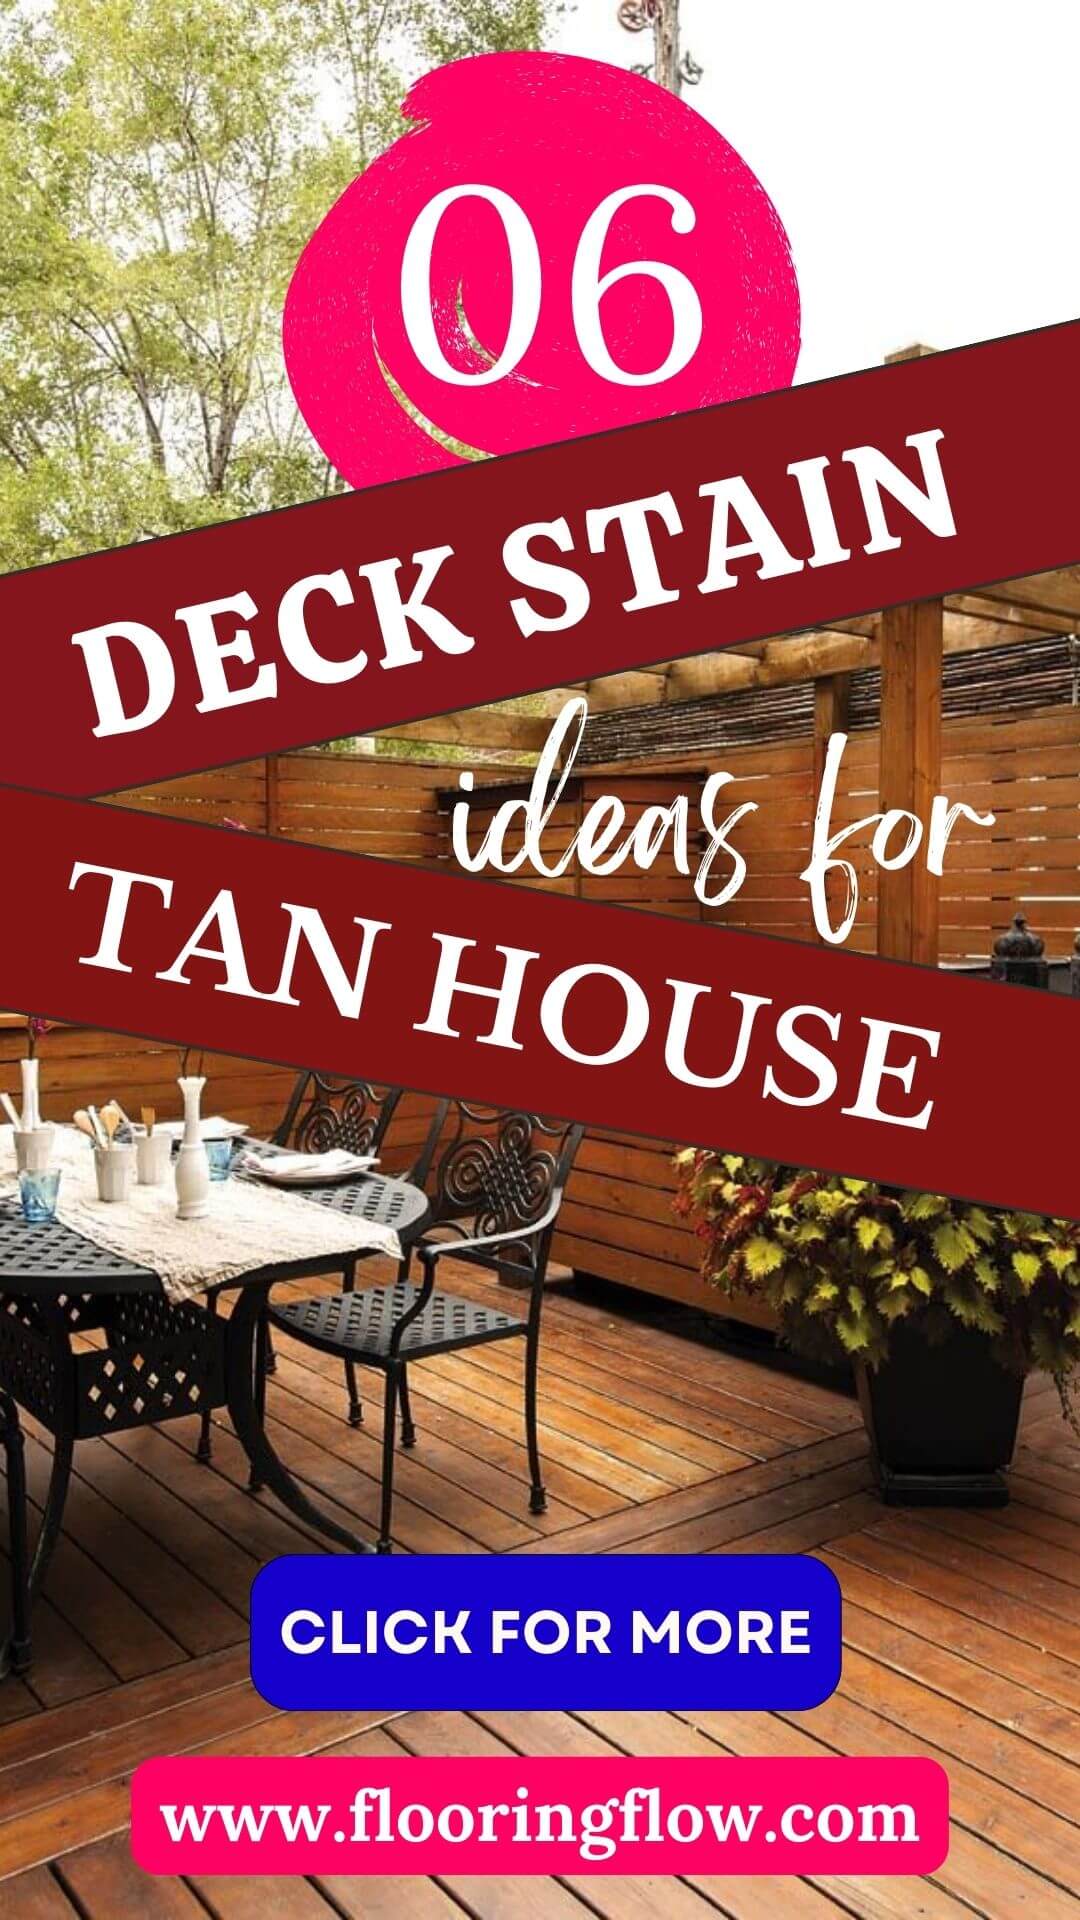 Deck Stain Ideas for Tan House